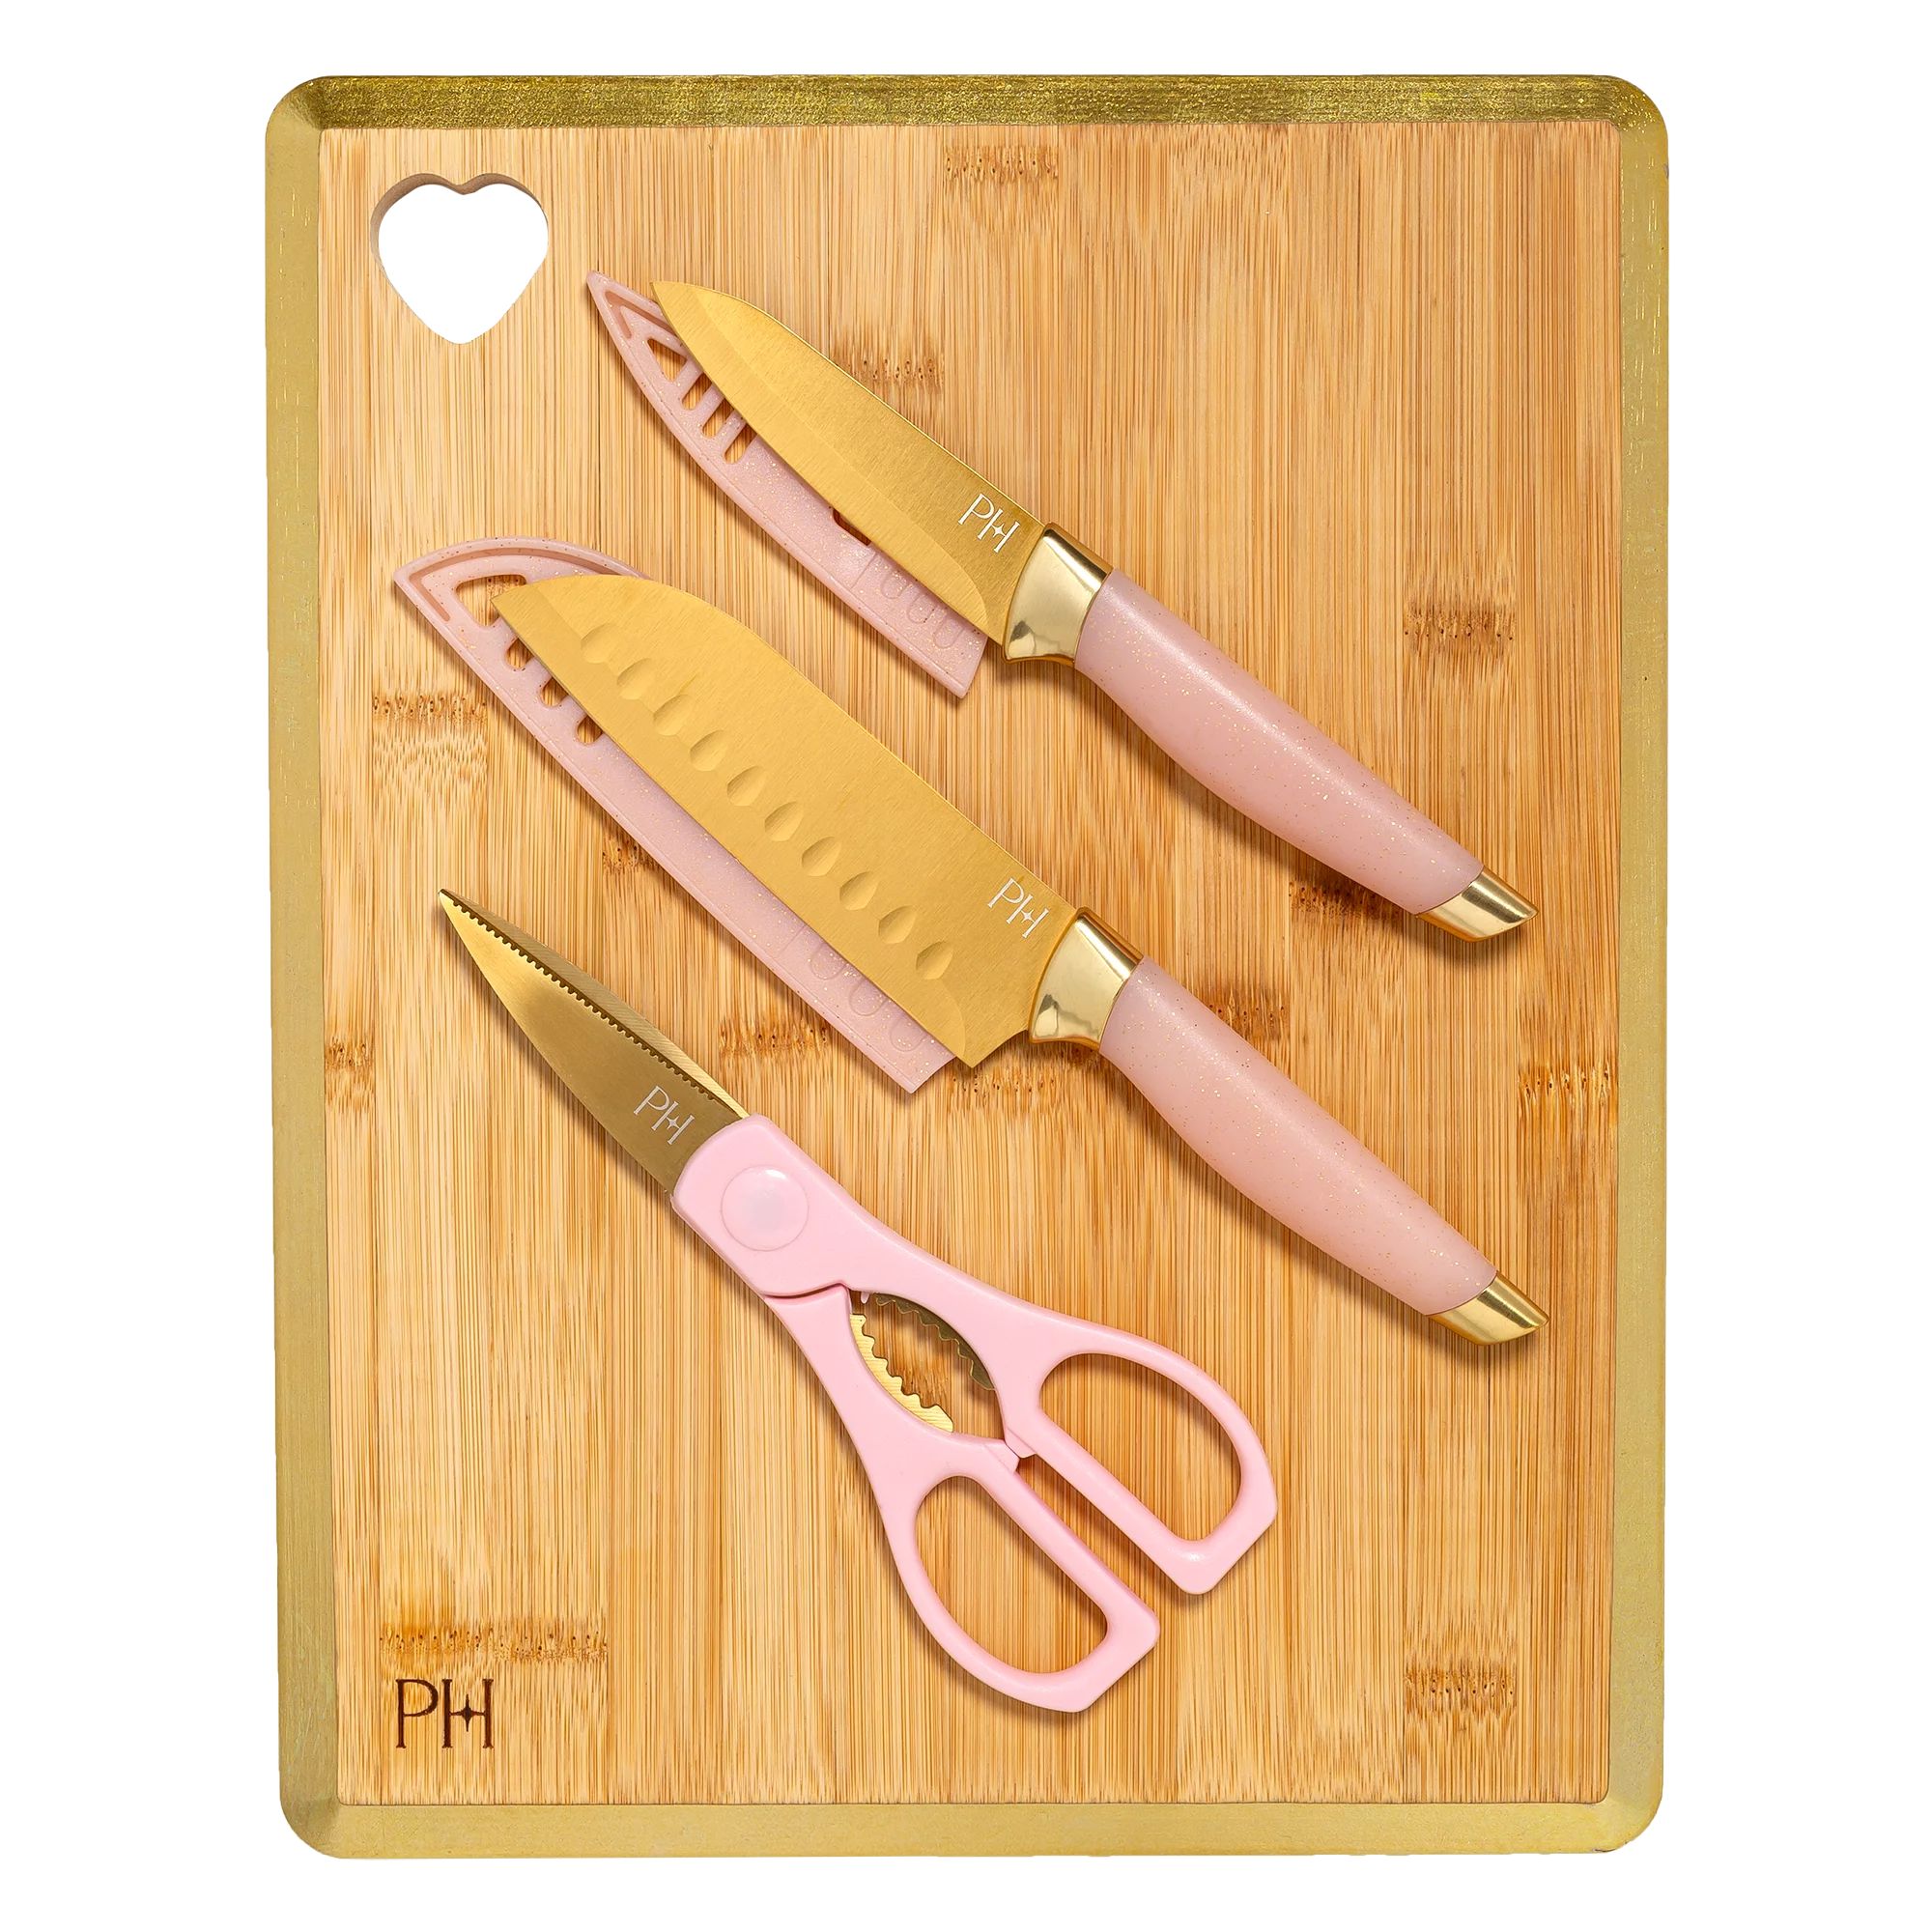 Paris Hilton 6-Piece Stainless Steel Cutlery Set with Bamboo Reversible Cutting Board, Pink | Walmart (US)